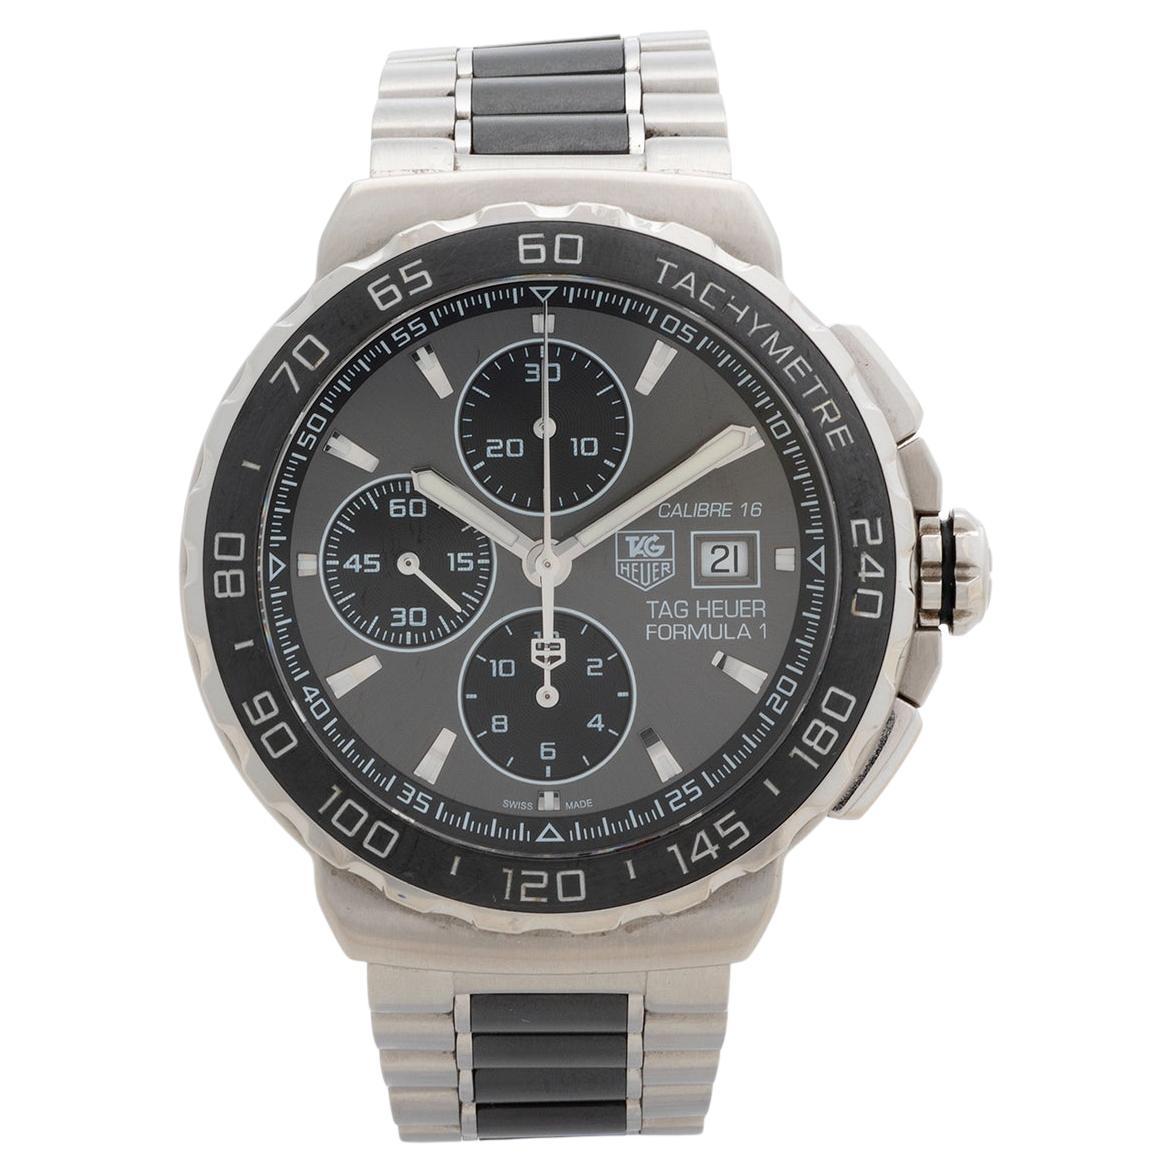 Our Tag Heuer Formula 1 chronograph reference CAU2010 automatic with cal 16 movement features a 44mm stainless steel case with ceramic bezel and grey dial with stainless steel and ceramic bracelet. Presented in outstanding condition with only light